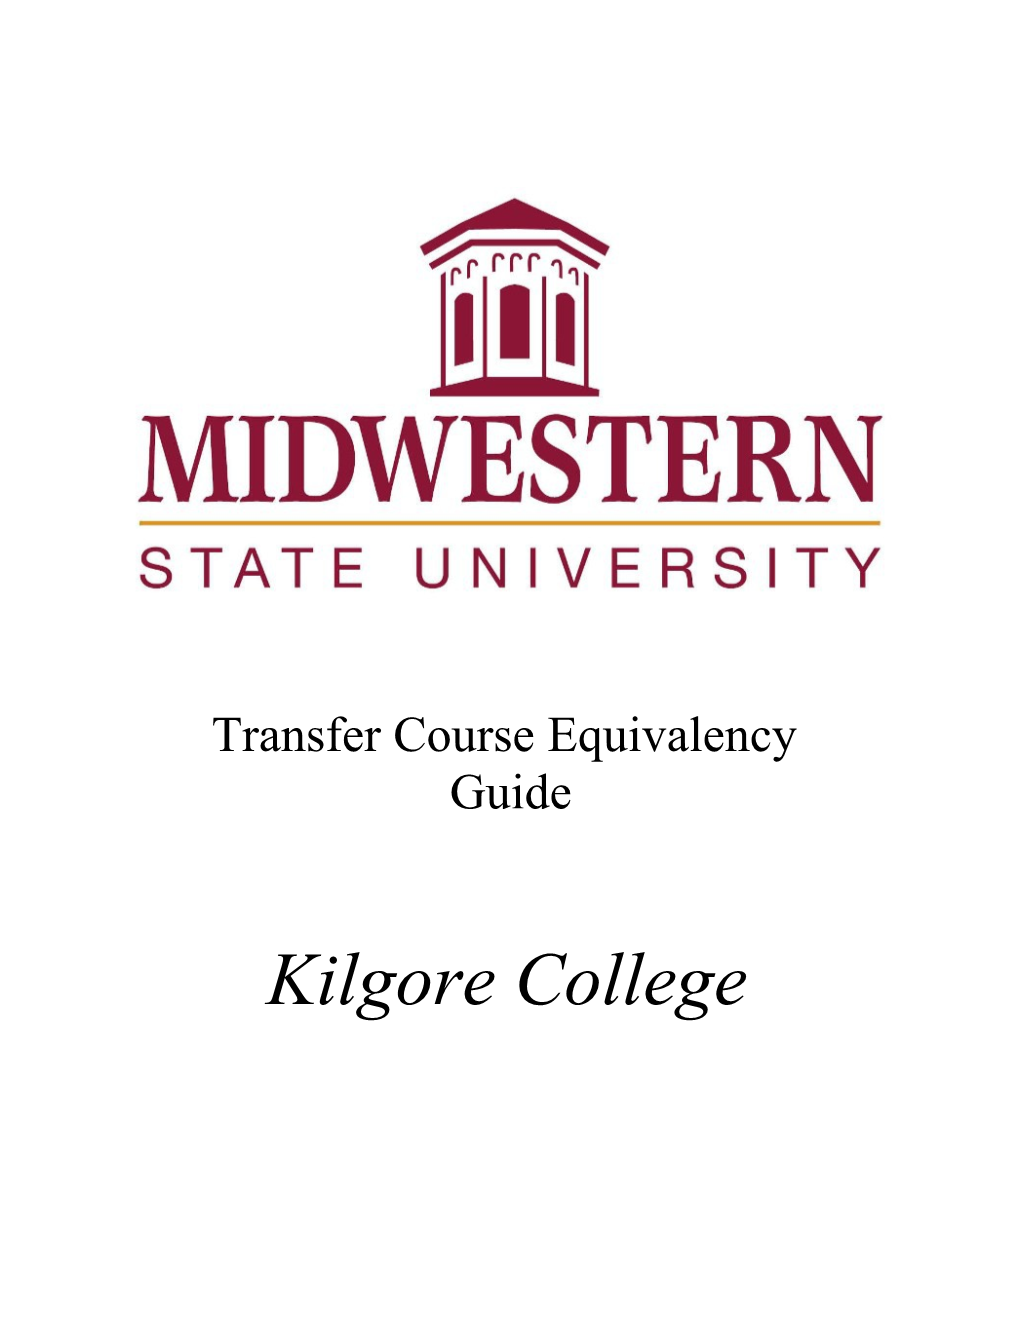 Use This Checklist to Mark the Courses Taken at Kilgore College